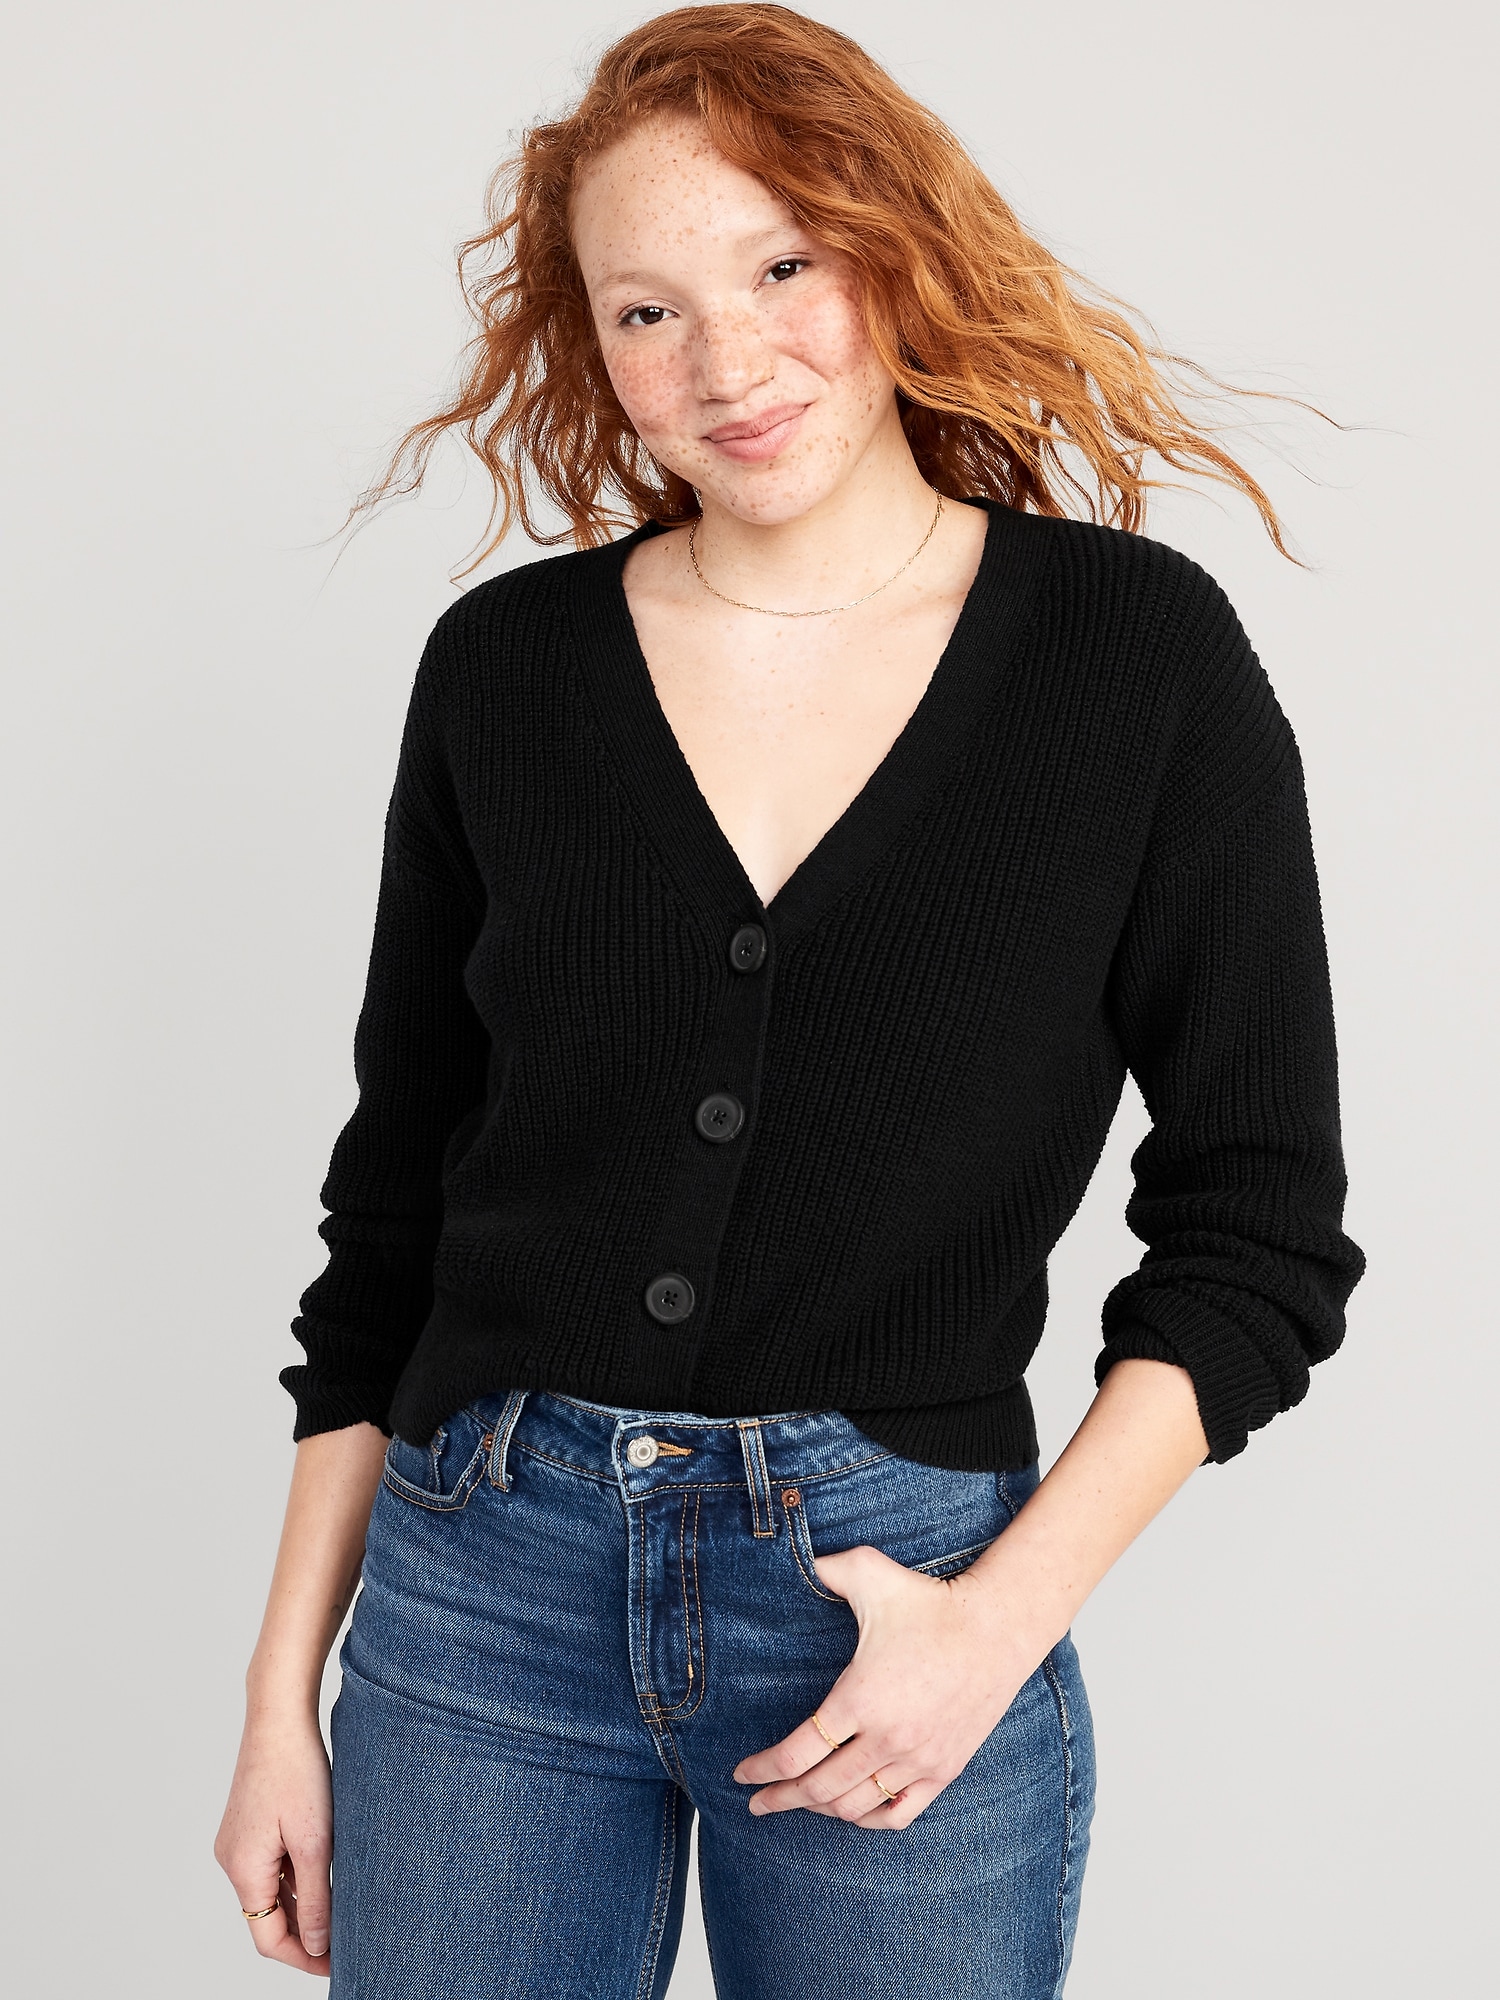 Old Navy Lightweight Cotton and Linen-Blend Shaker-Stitch Cardigan Sweater for Women black. 1